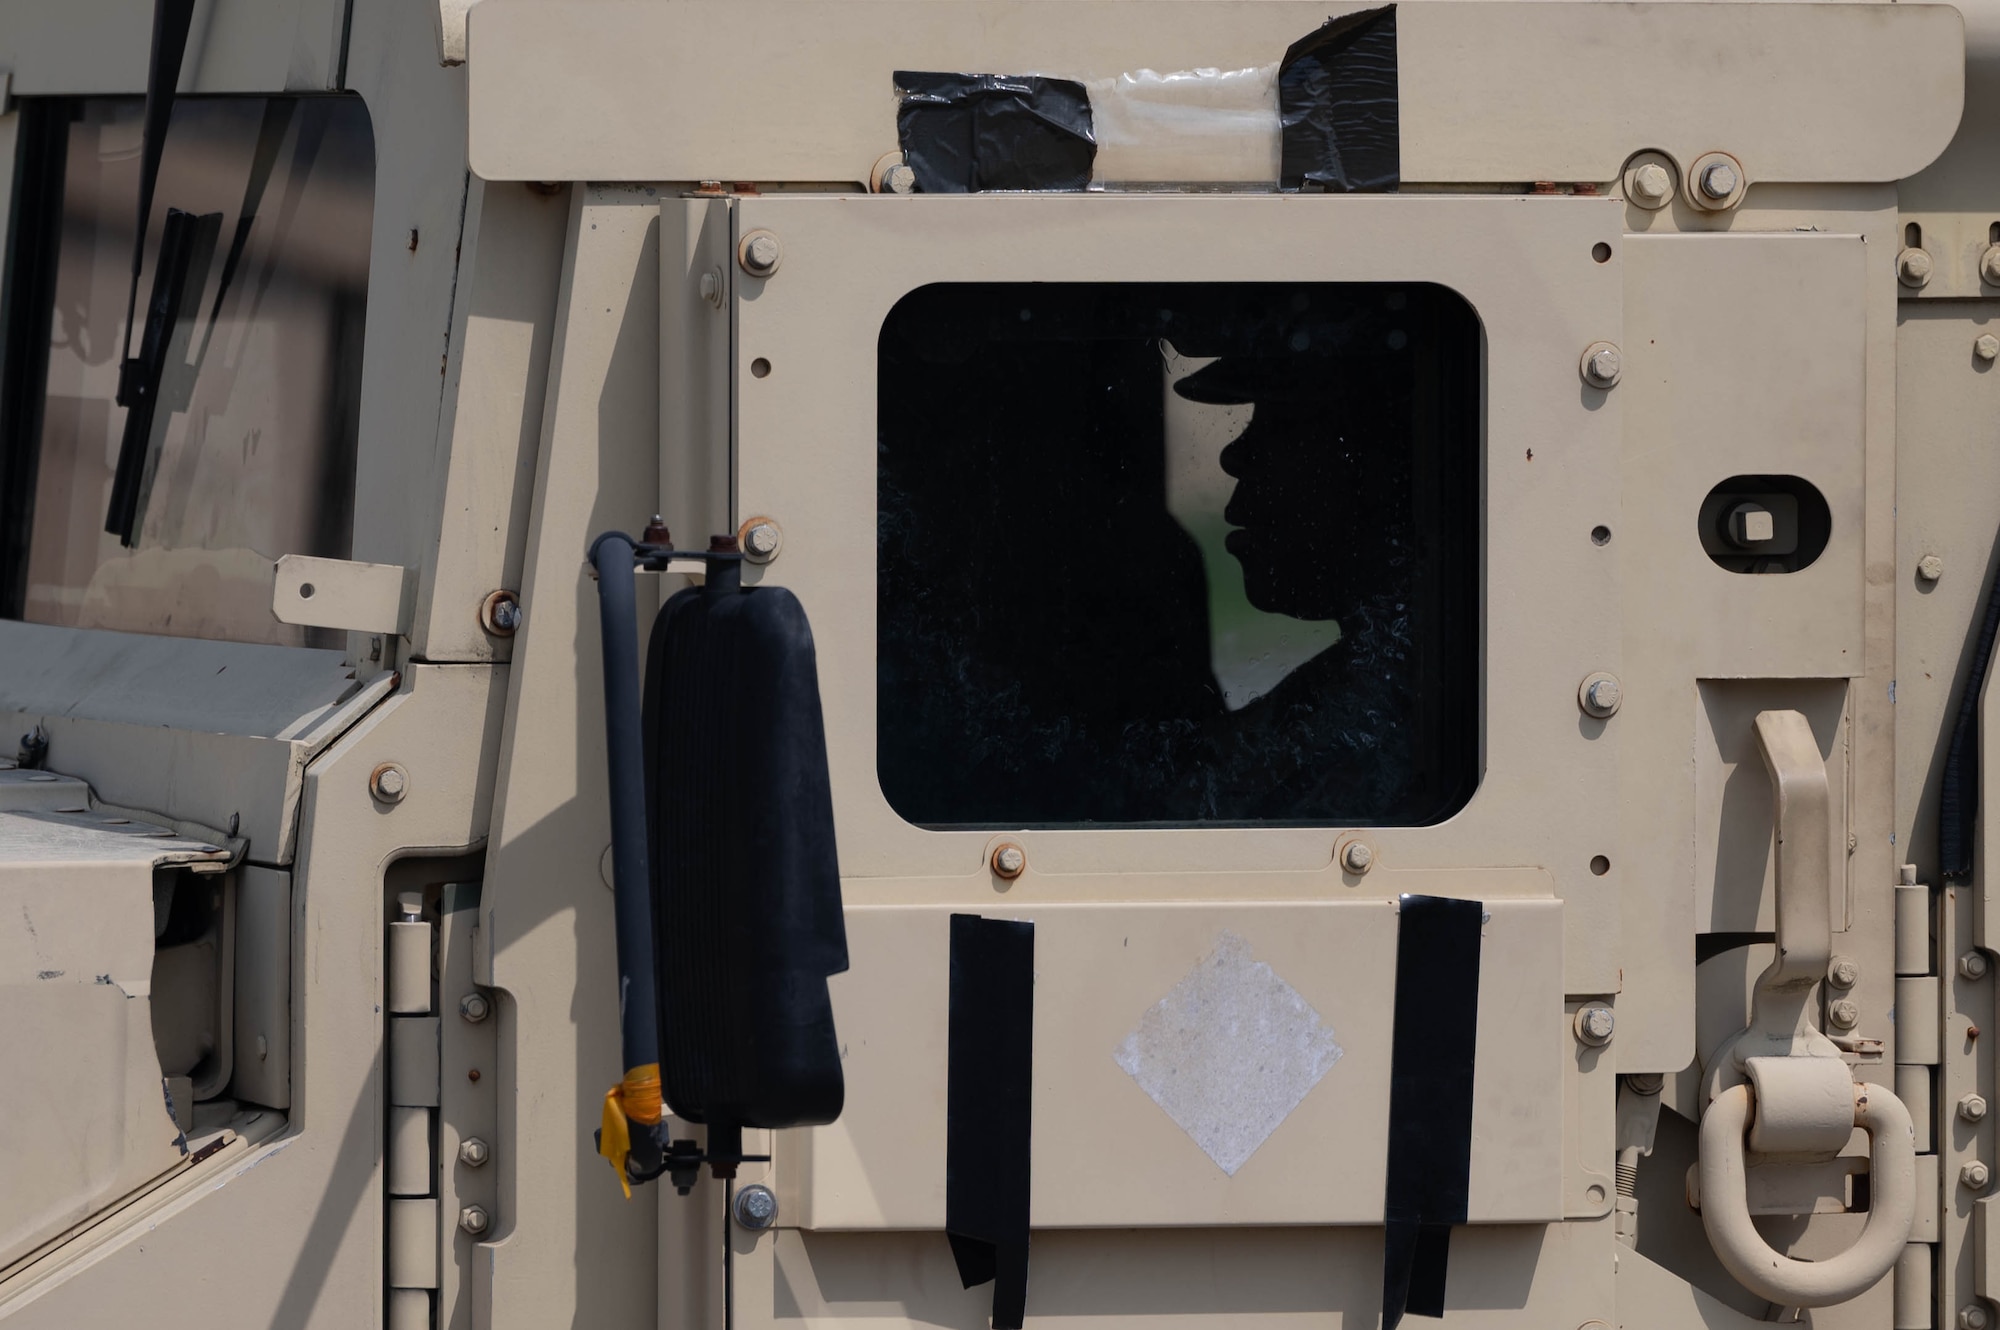 An Airman sits inside a High Mobility Multipurpose Wheeled Vehicle.